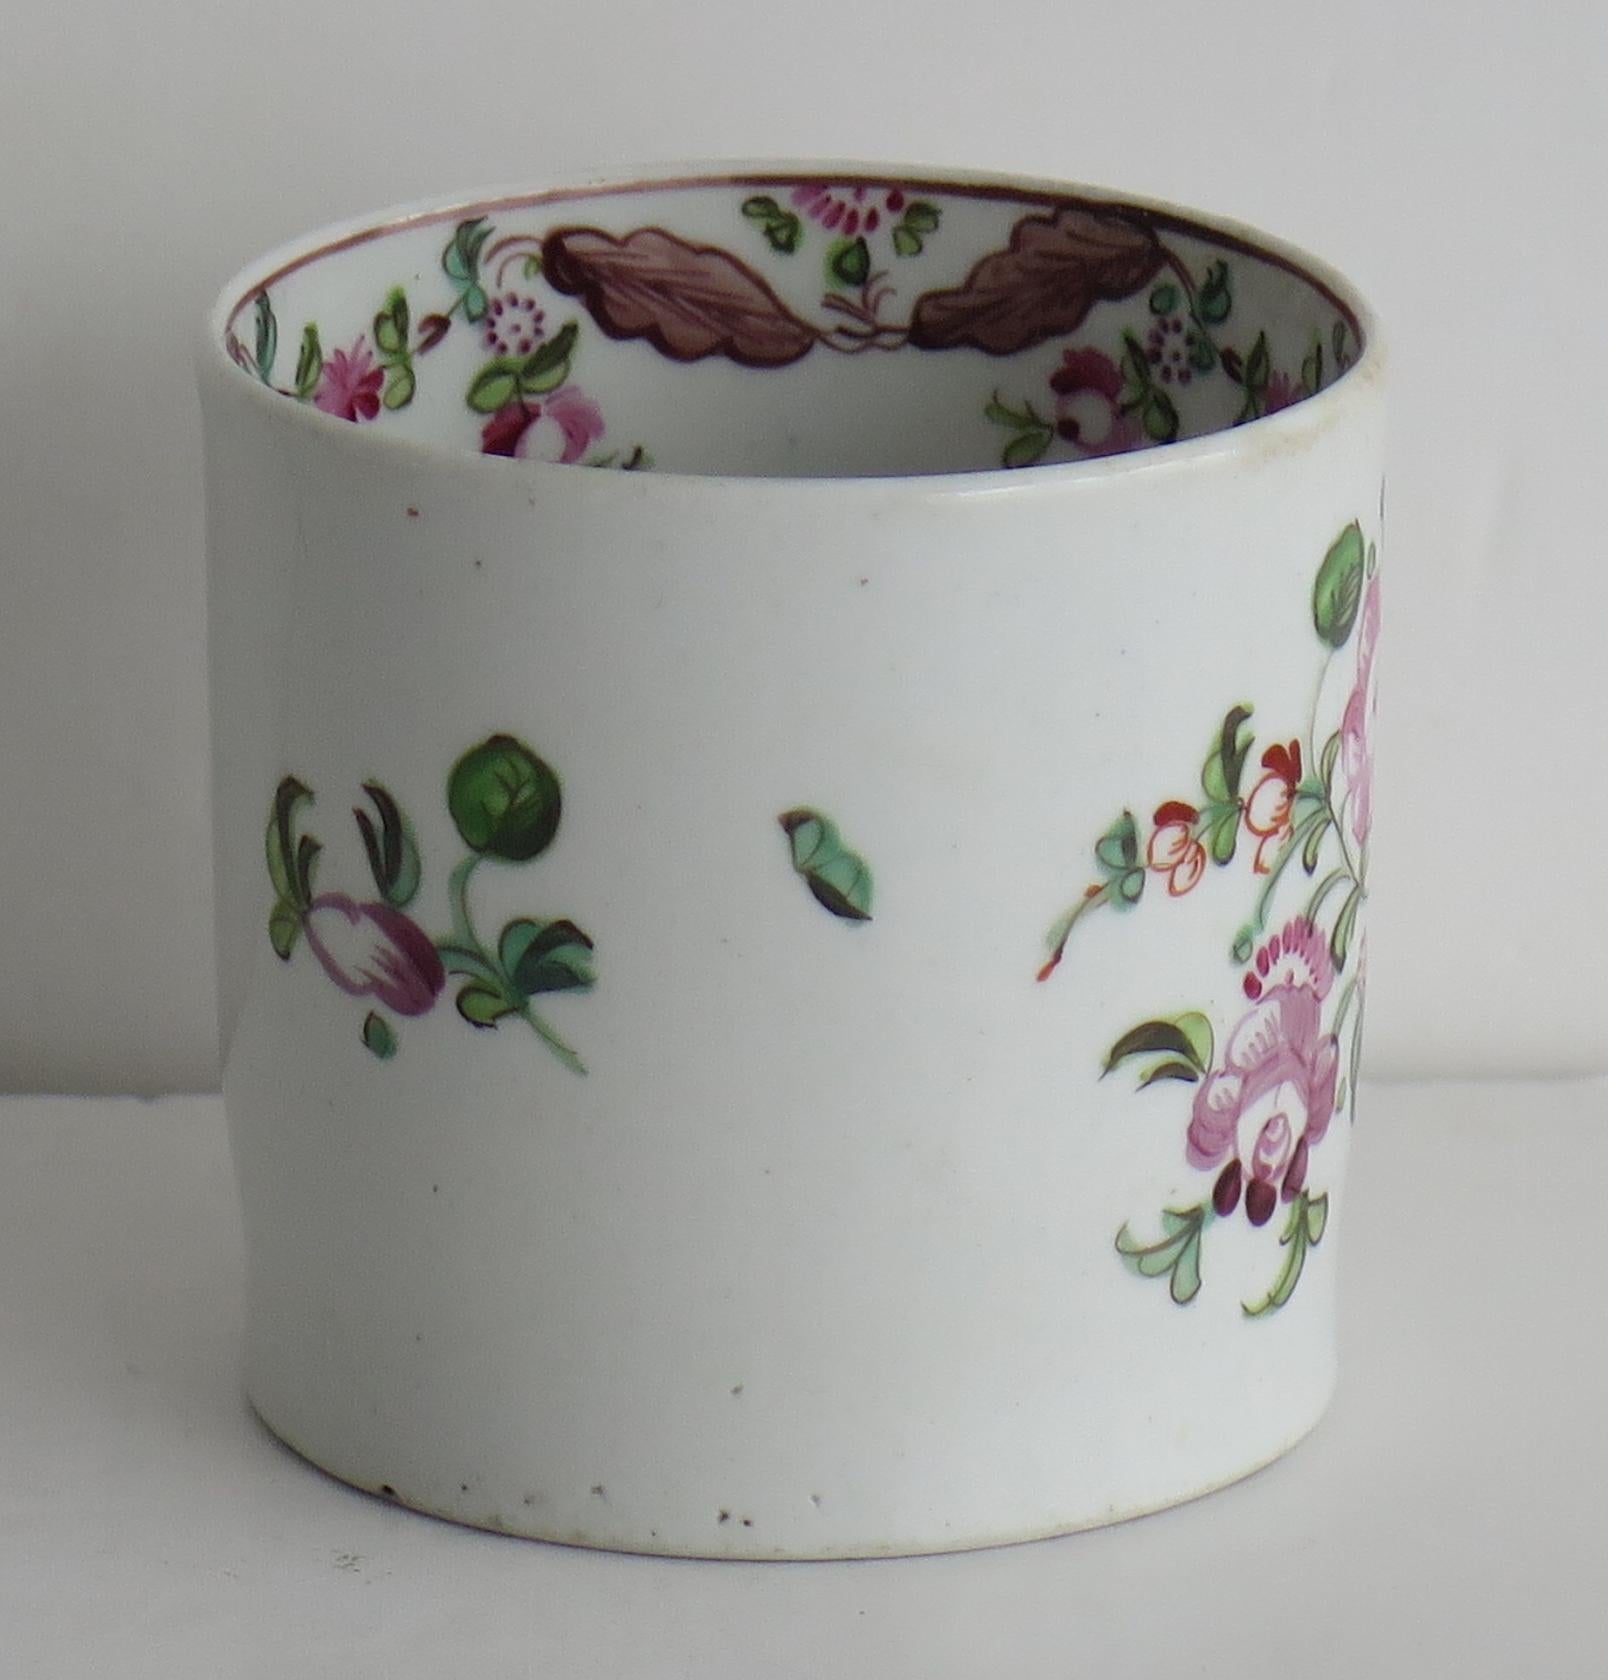 This is a hard paste porcelain coffee Can by New Hall, dating to the turn of the 18th century, George 111rd period, circa 1800.

The piece is well potted of hard paste porcelain on a low foot with a loop handle having rounded attachments.

The